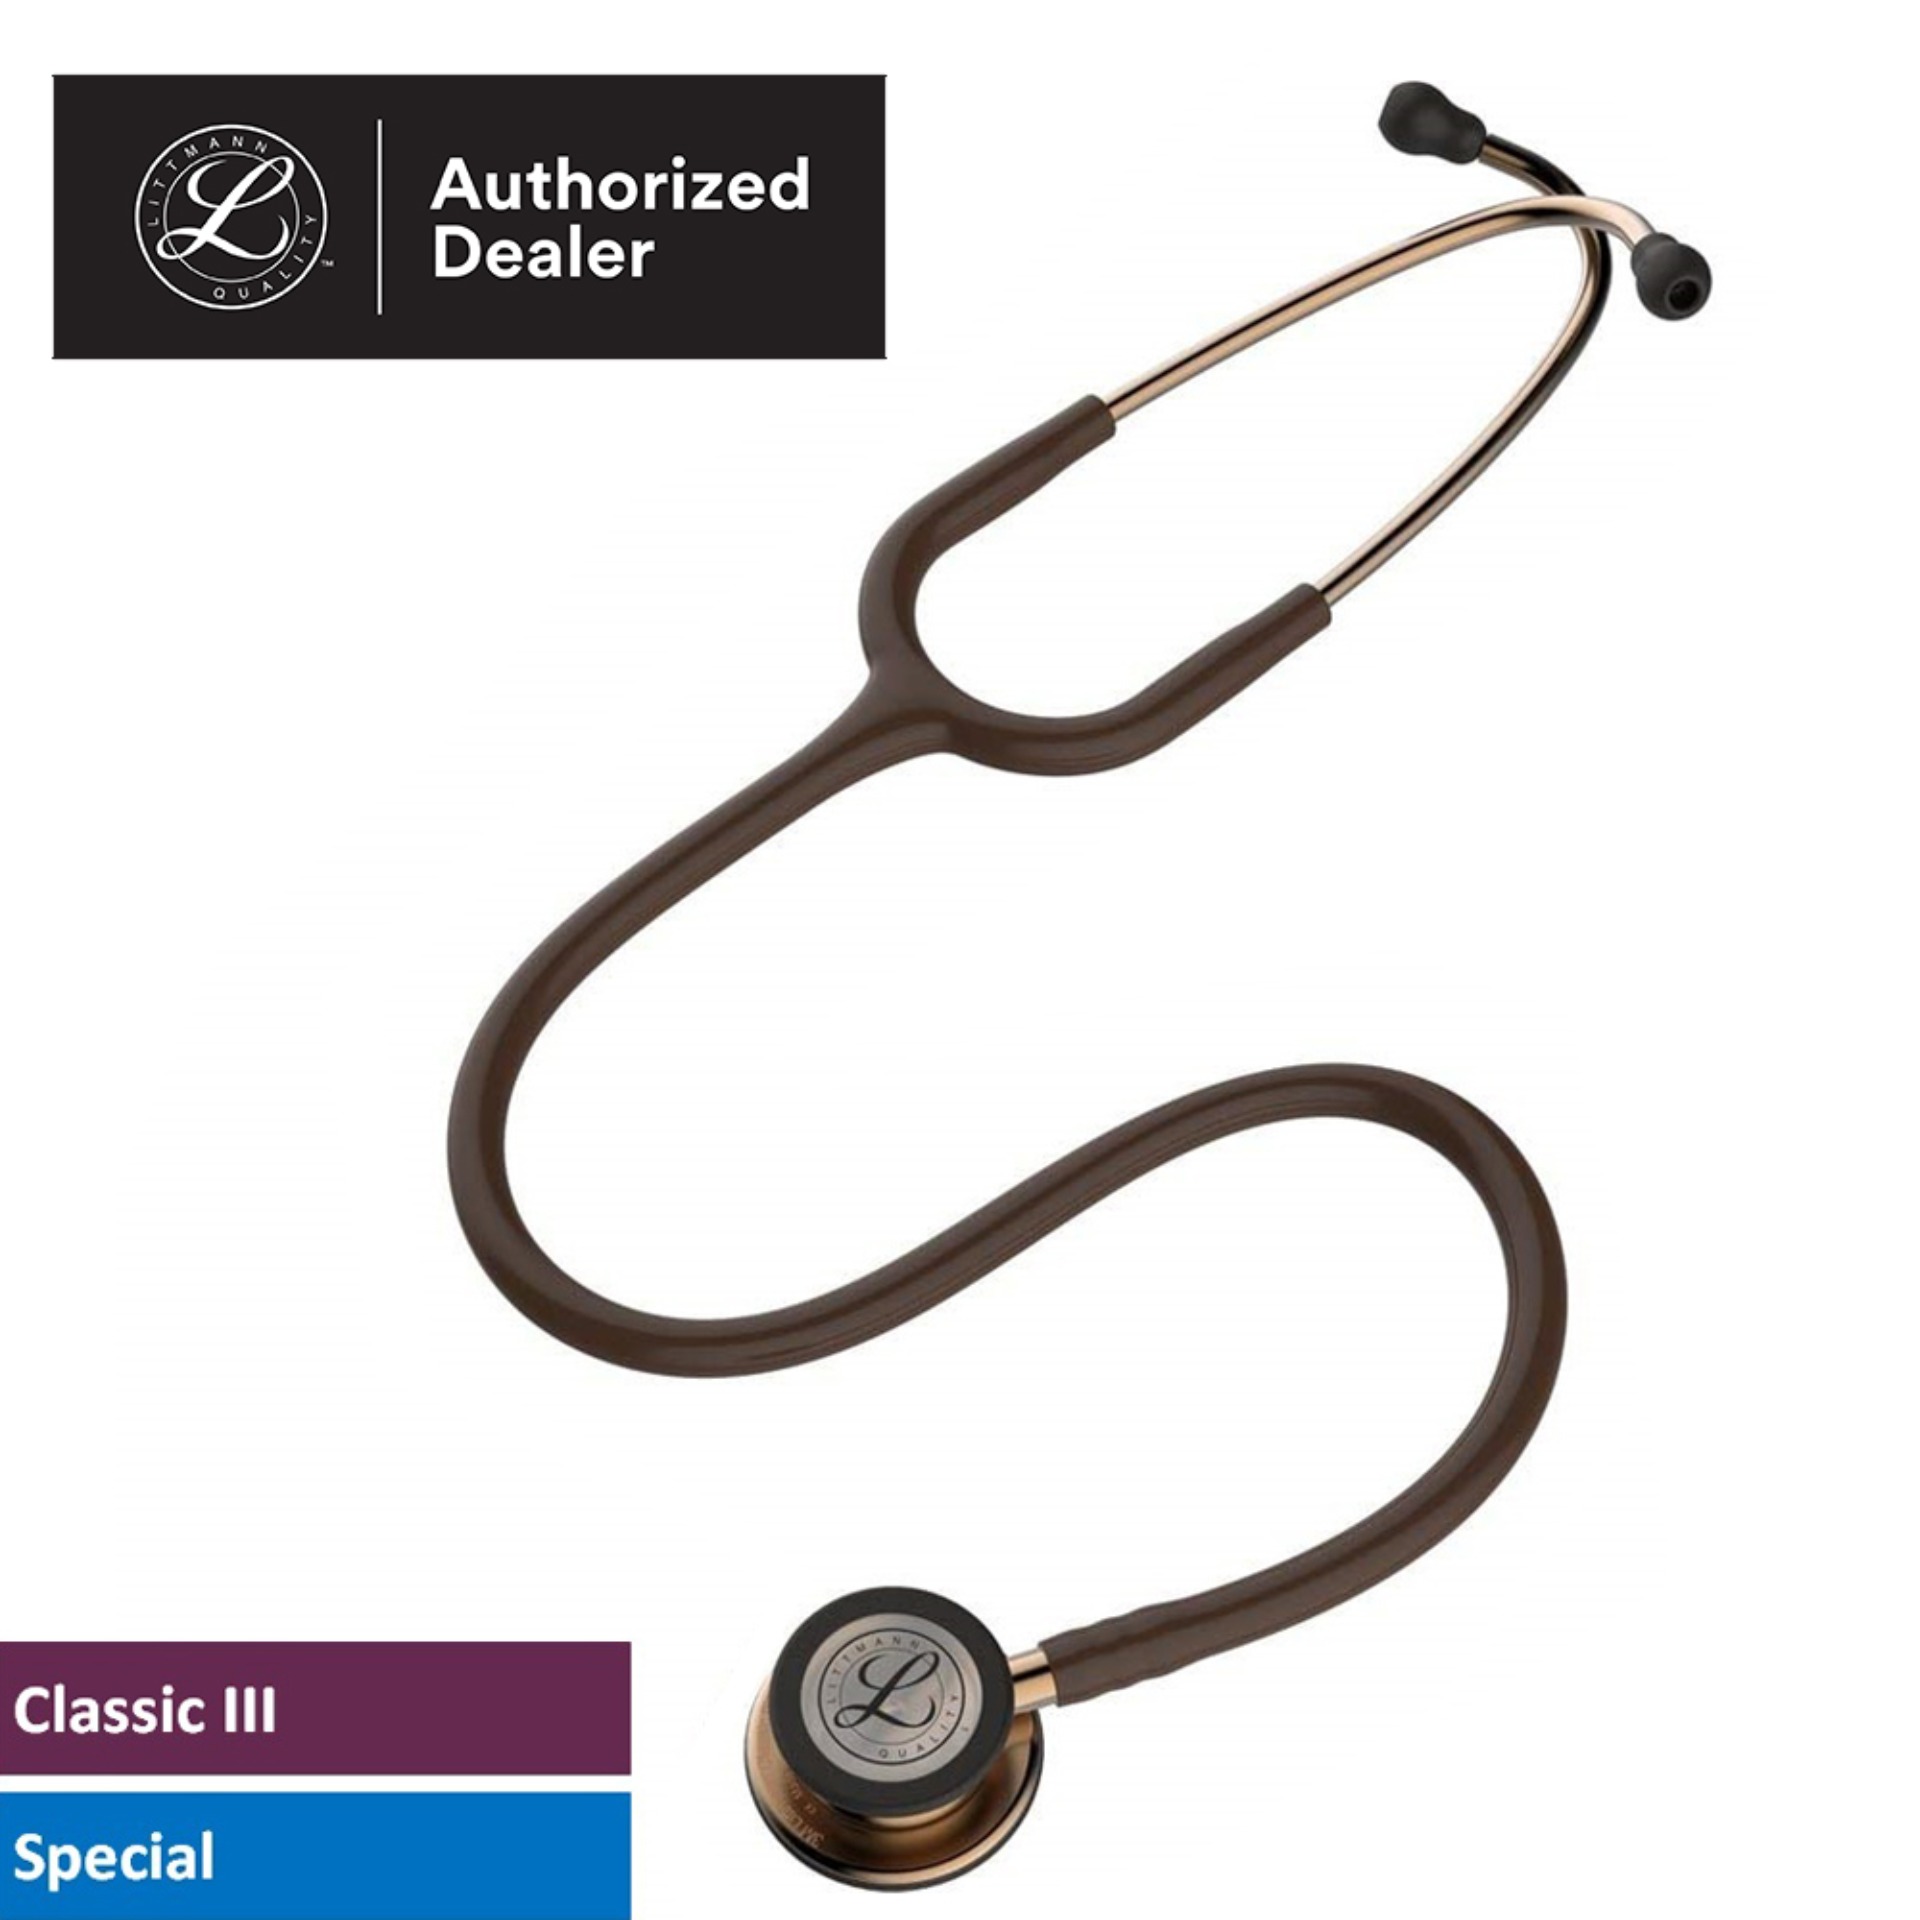 3M Littmann Classic III Stethoscope, 27 inch, #5809 (Chocolate Tube, Copper-Finish Chestpiece, Stainless Stem & Eartubes)